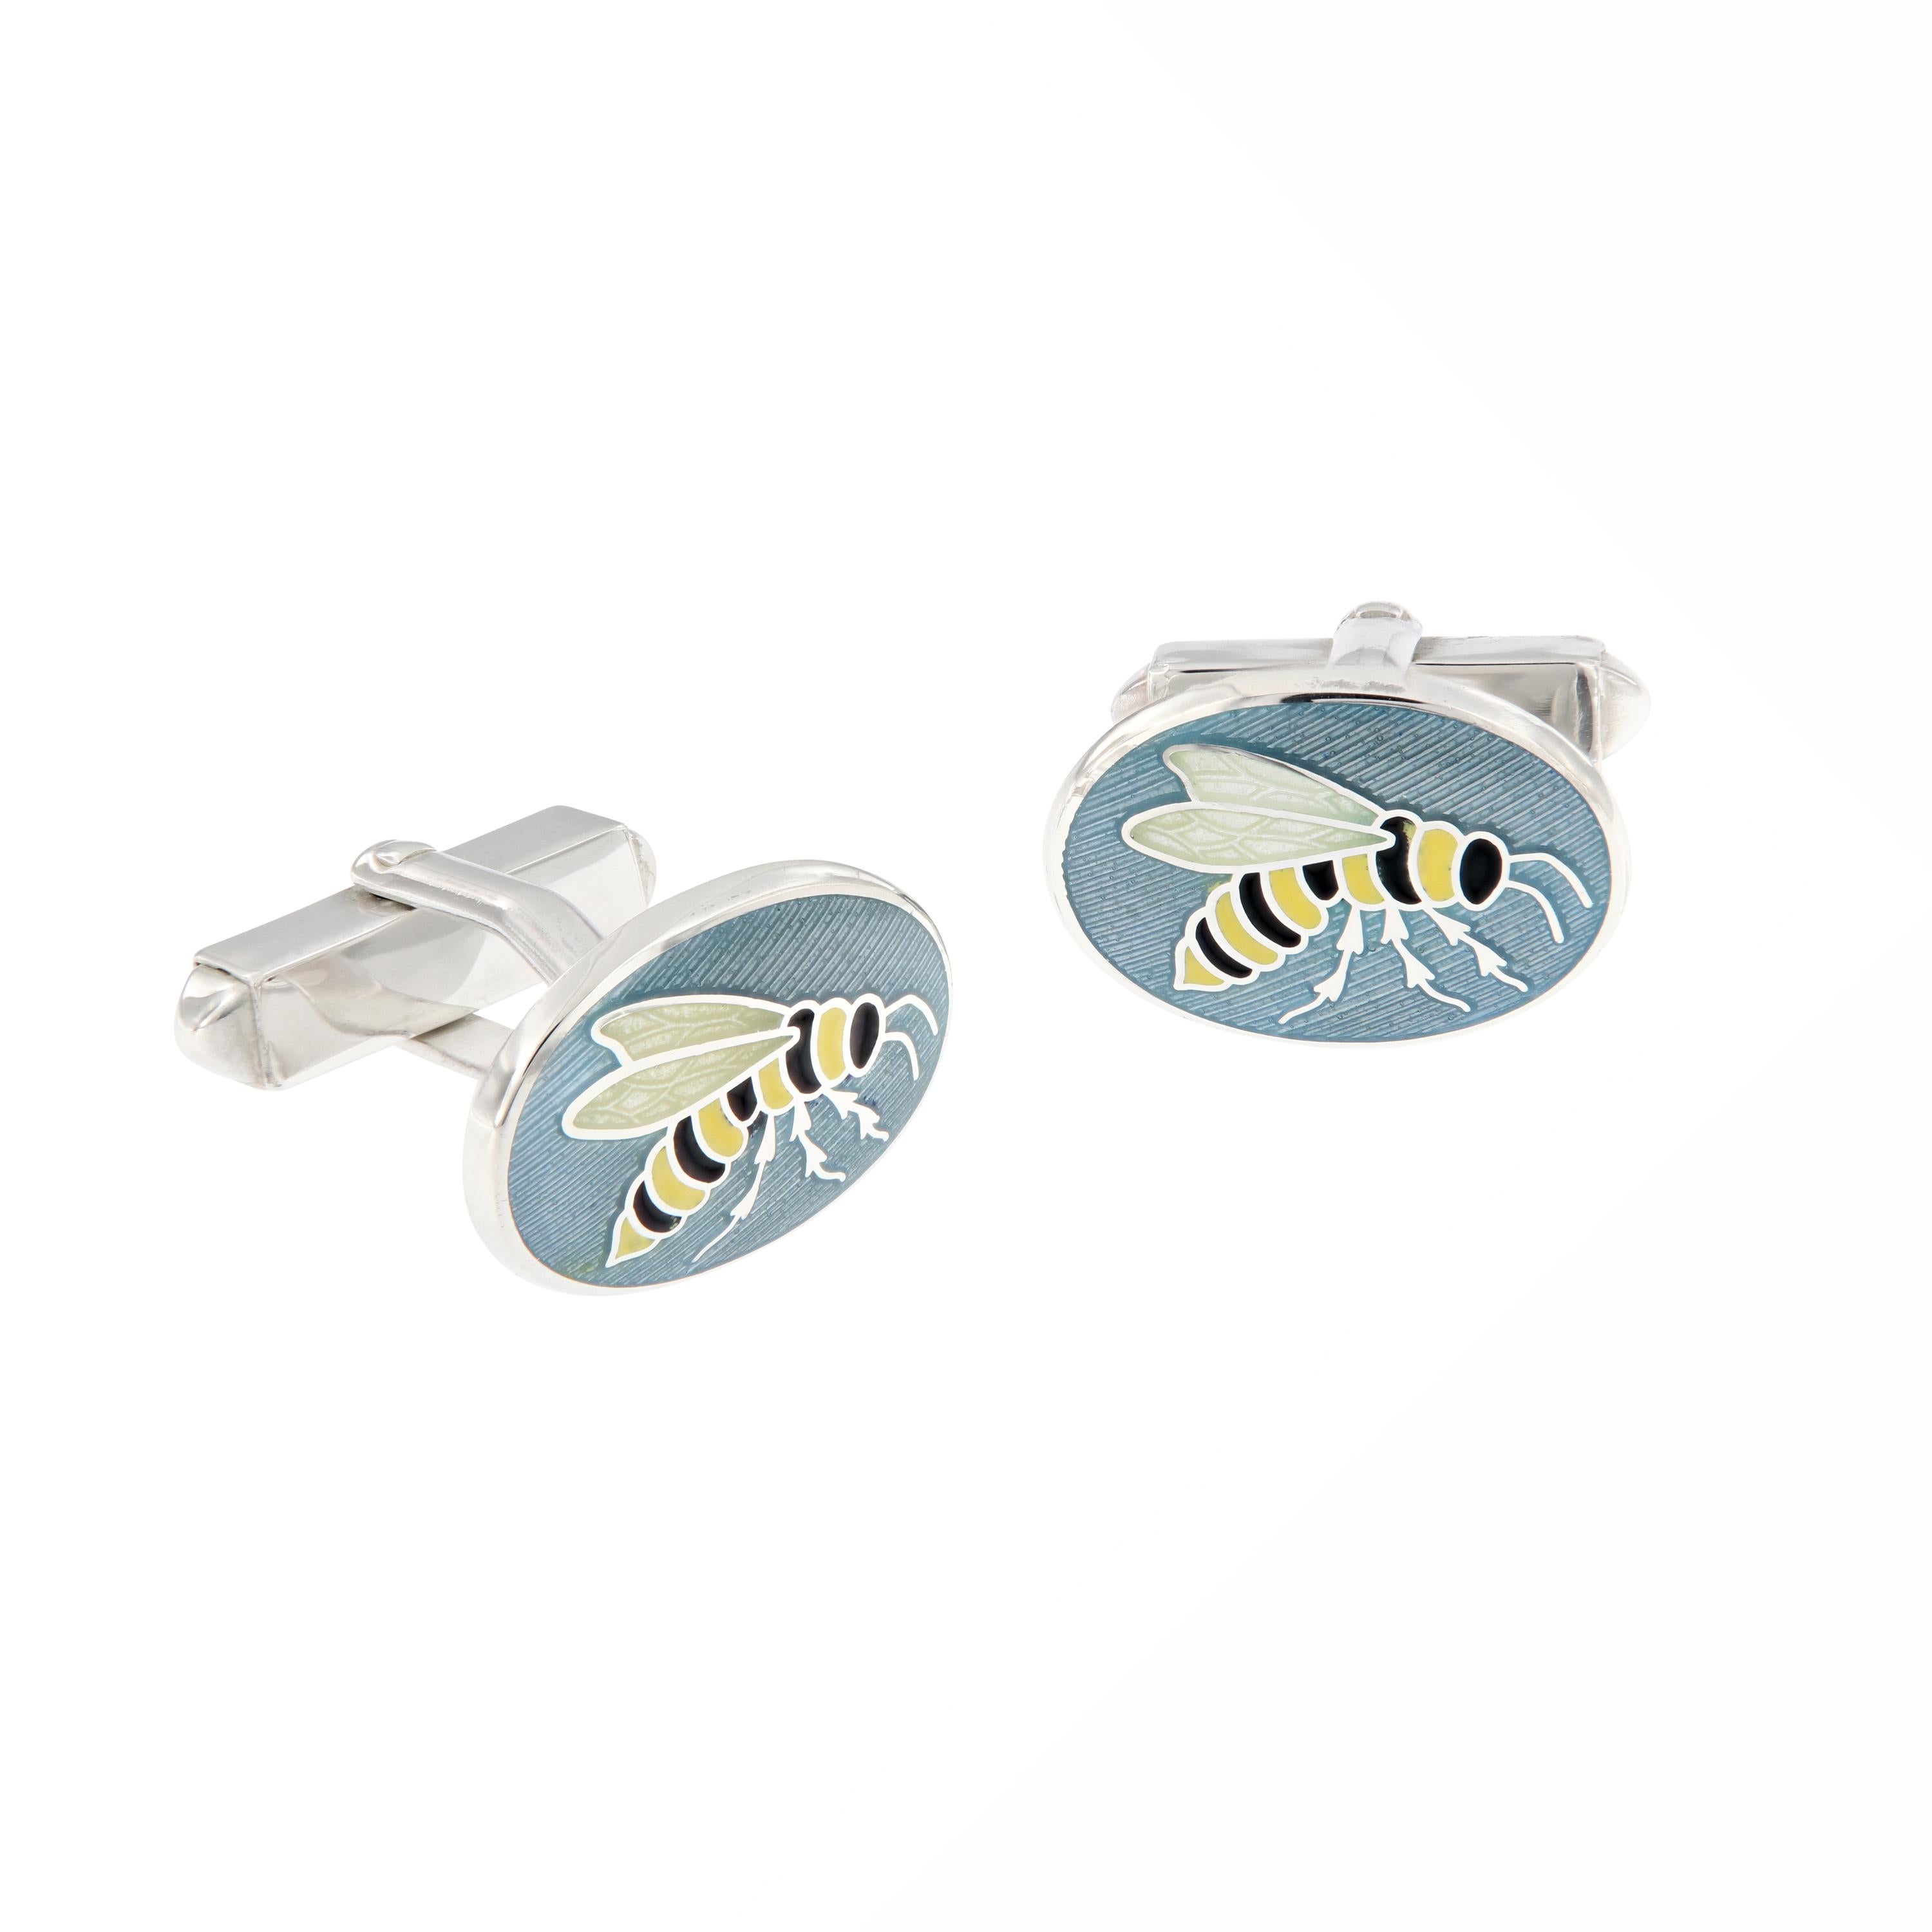 Beautiful Guilloche enamel contemporary wasp design cufflinks. Handmade in England for Campanelli & Pear. Weighs 12.6 grams. Oval measures 14mm x 19mm.